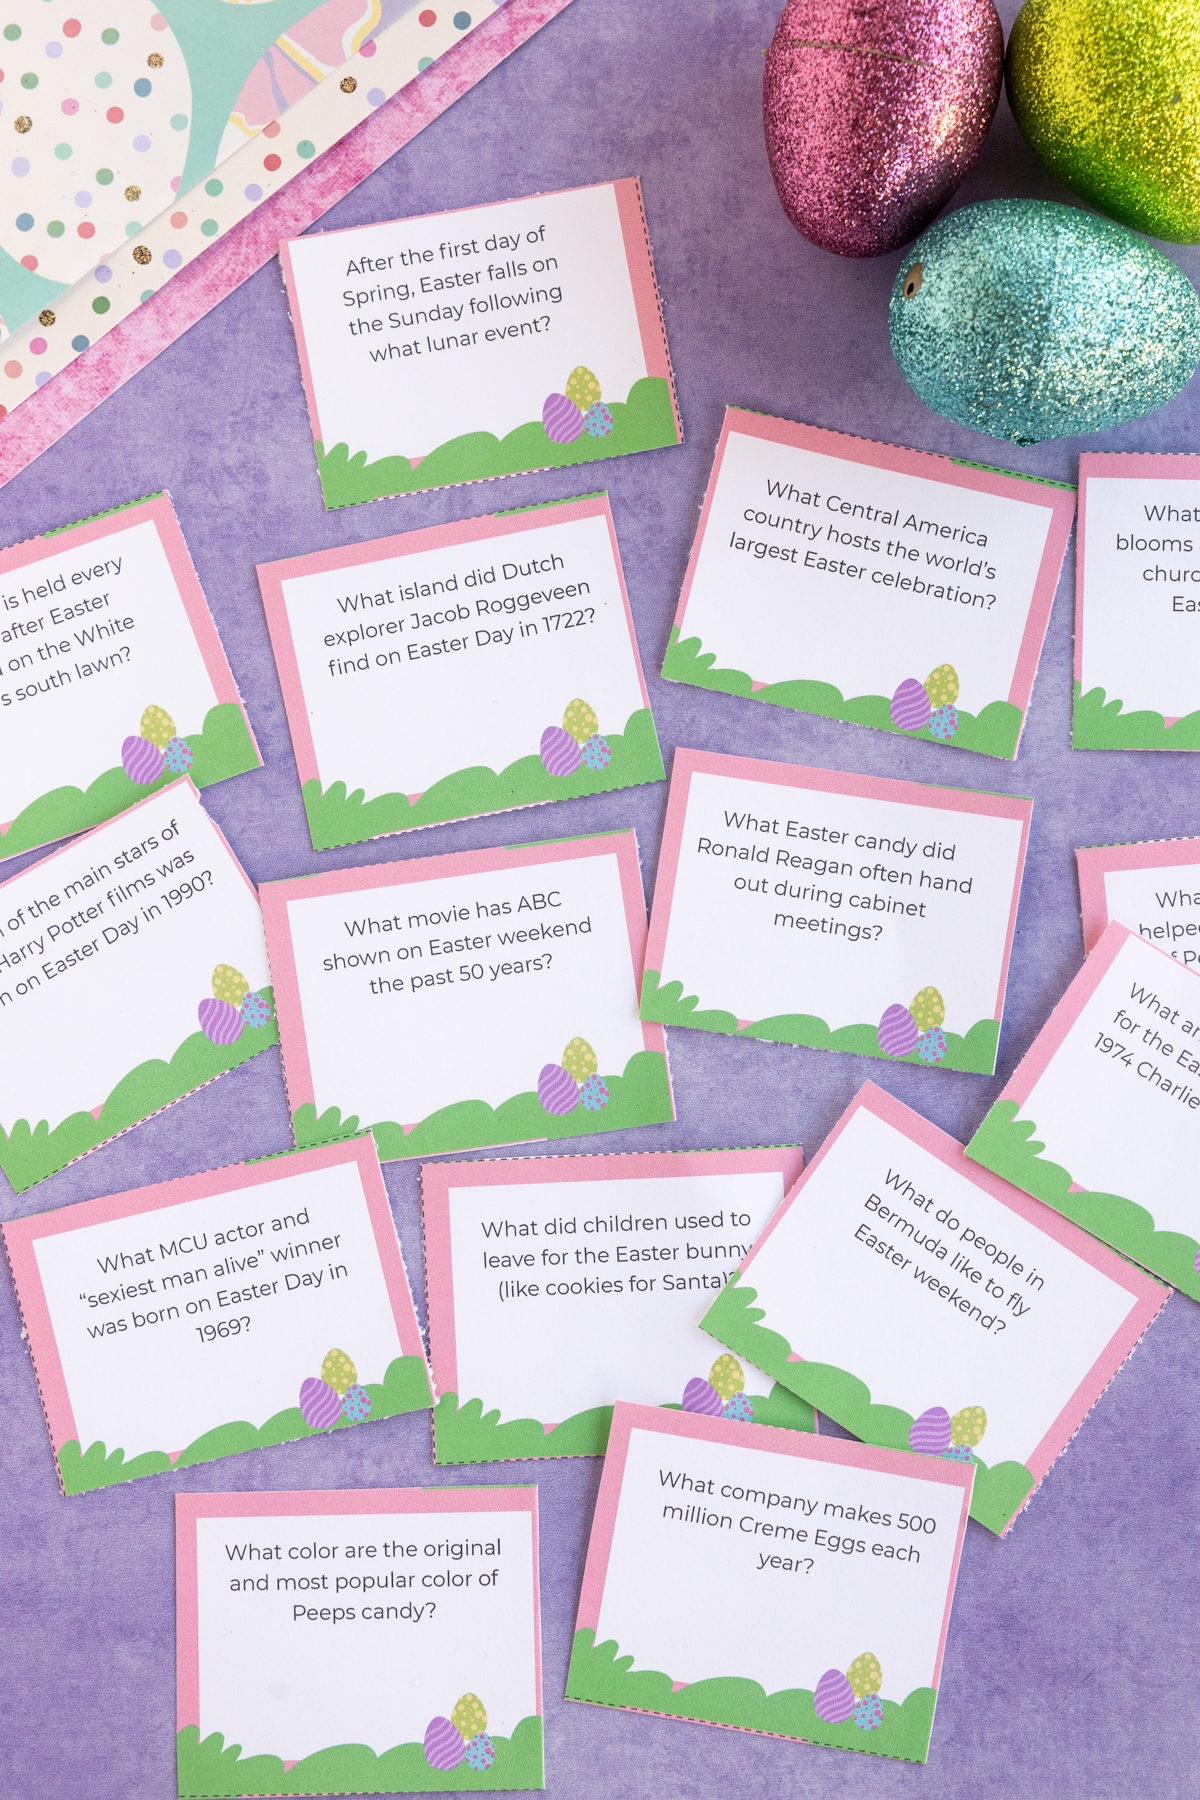 printed out Easter trivia questions on cards